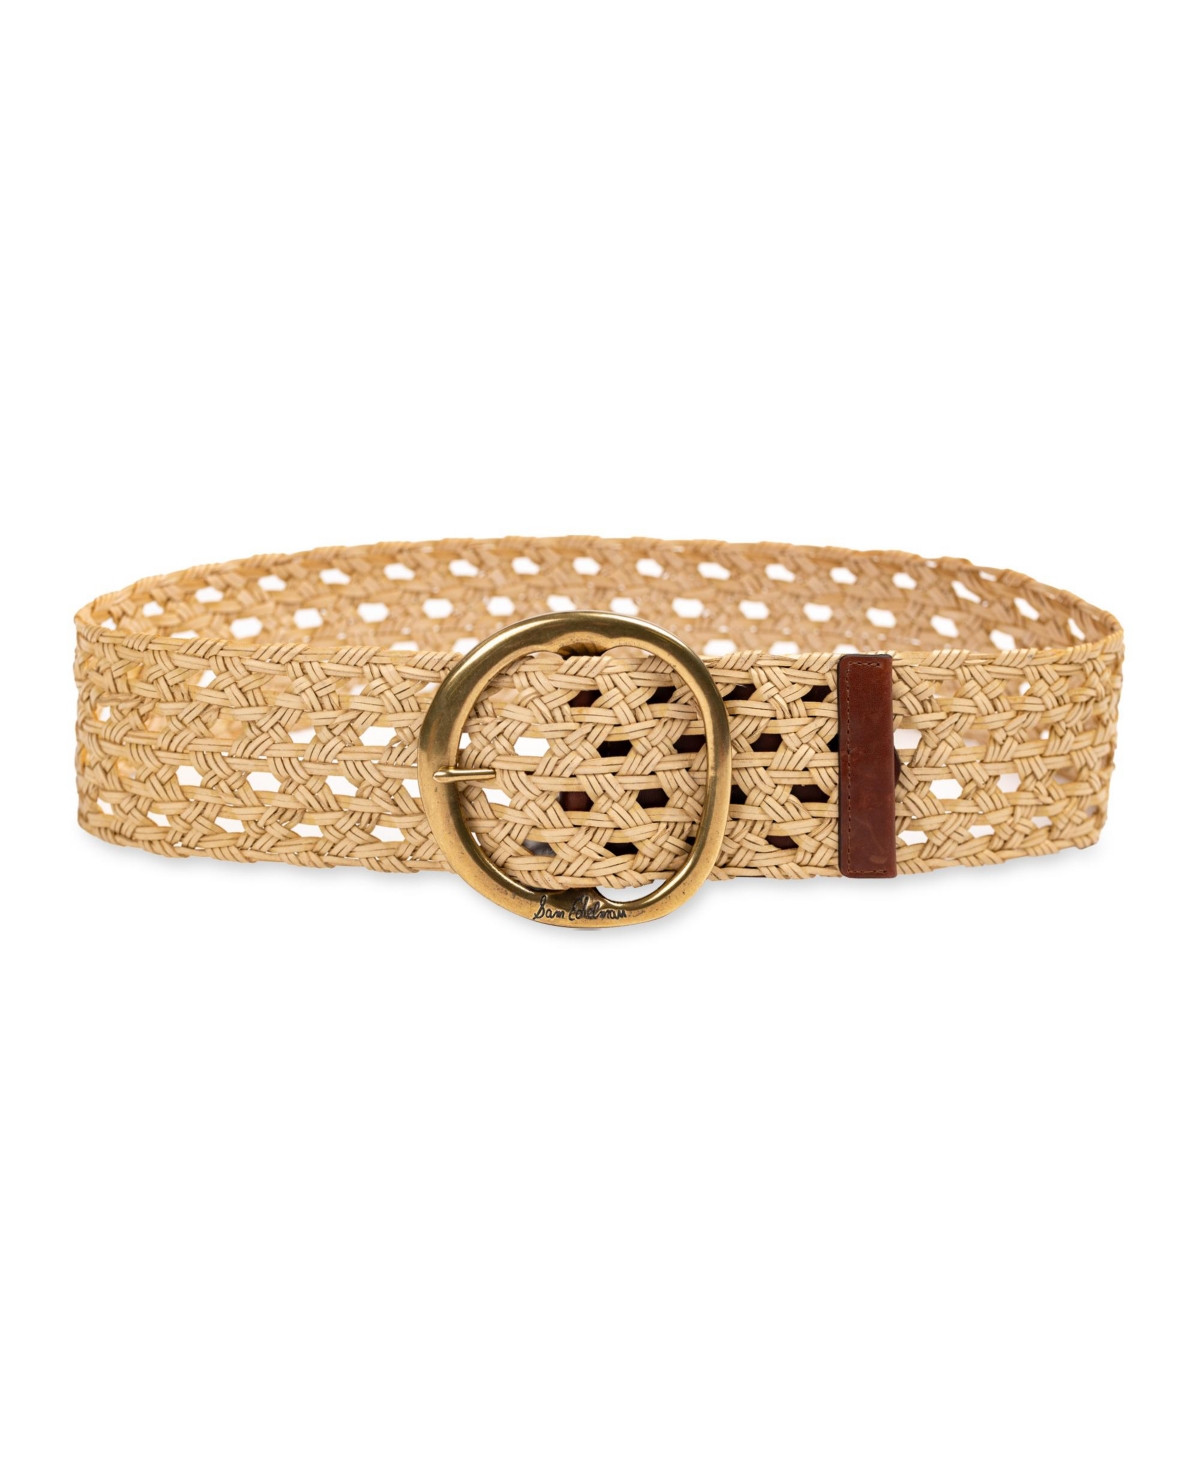 Women's Woven Leather Belt with Circular Center Bar Buckle - Natural